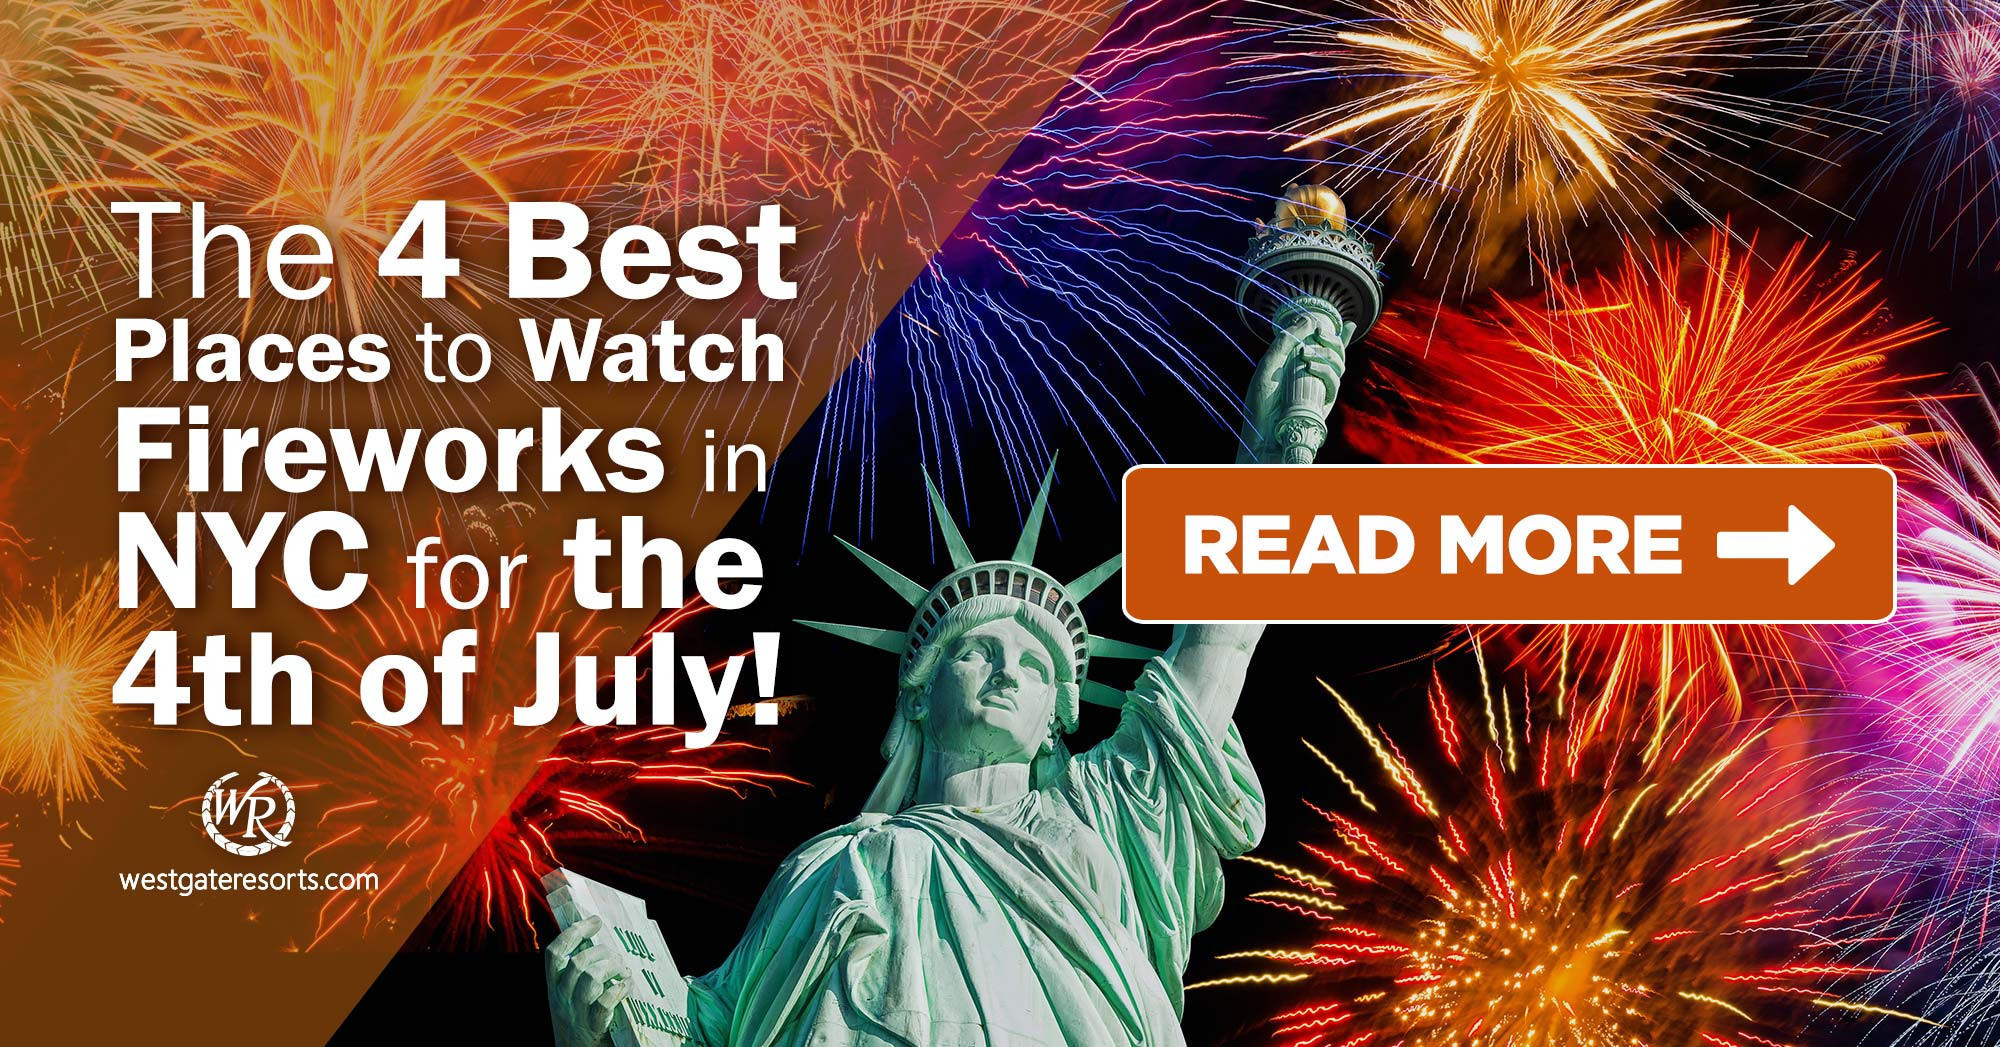 The 4 Best Places to Watch Fireworks in NYC for the 4th of July! | Fireworks NYC Schedules